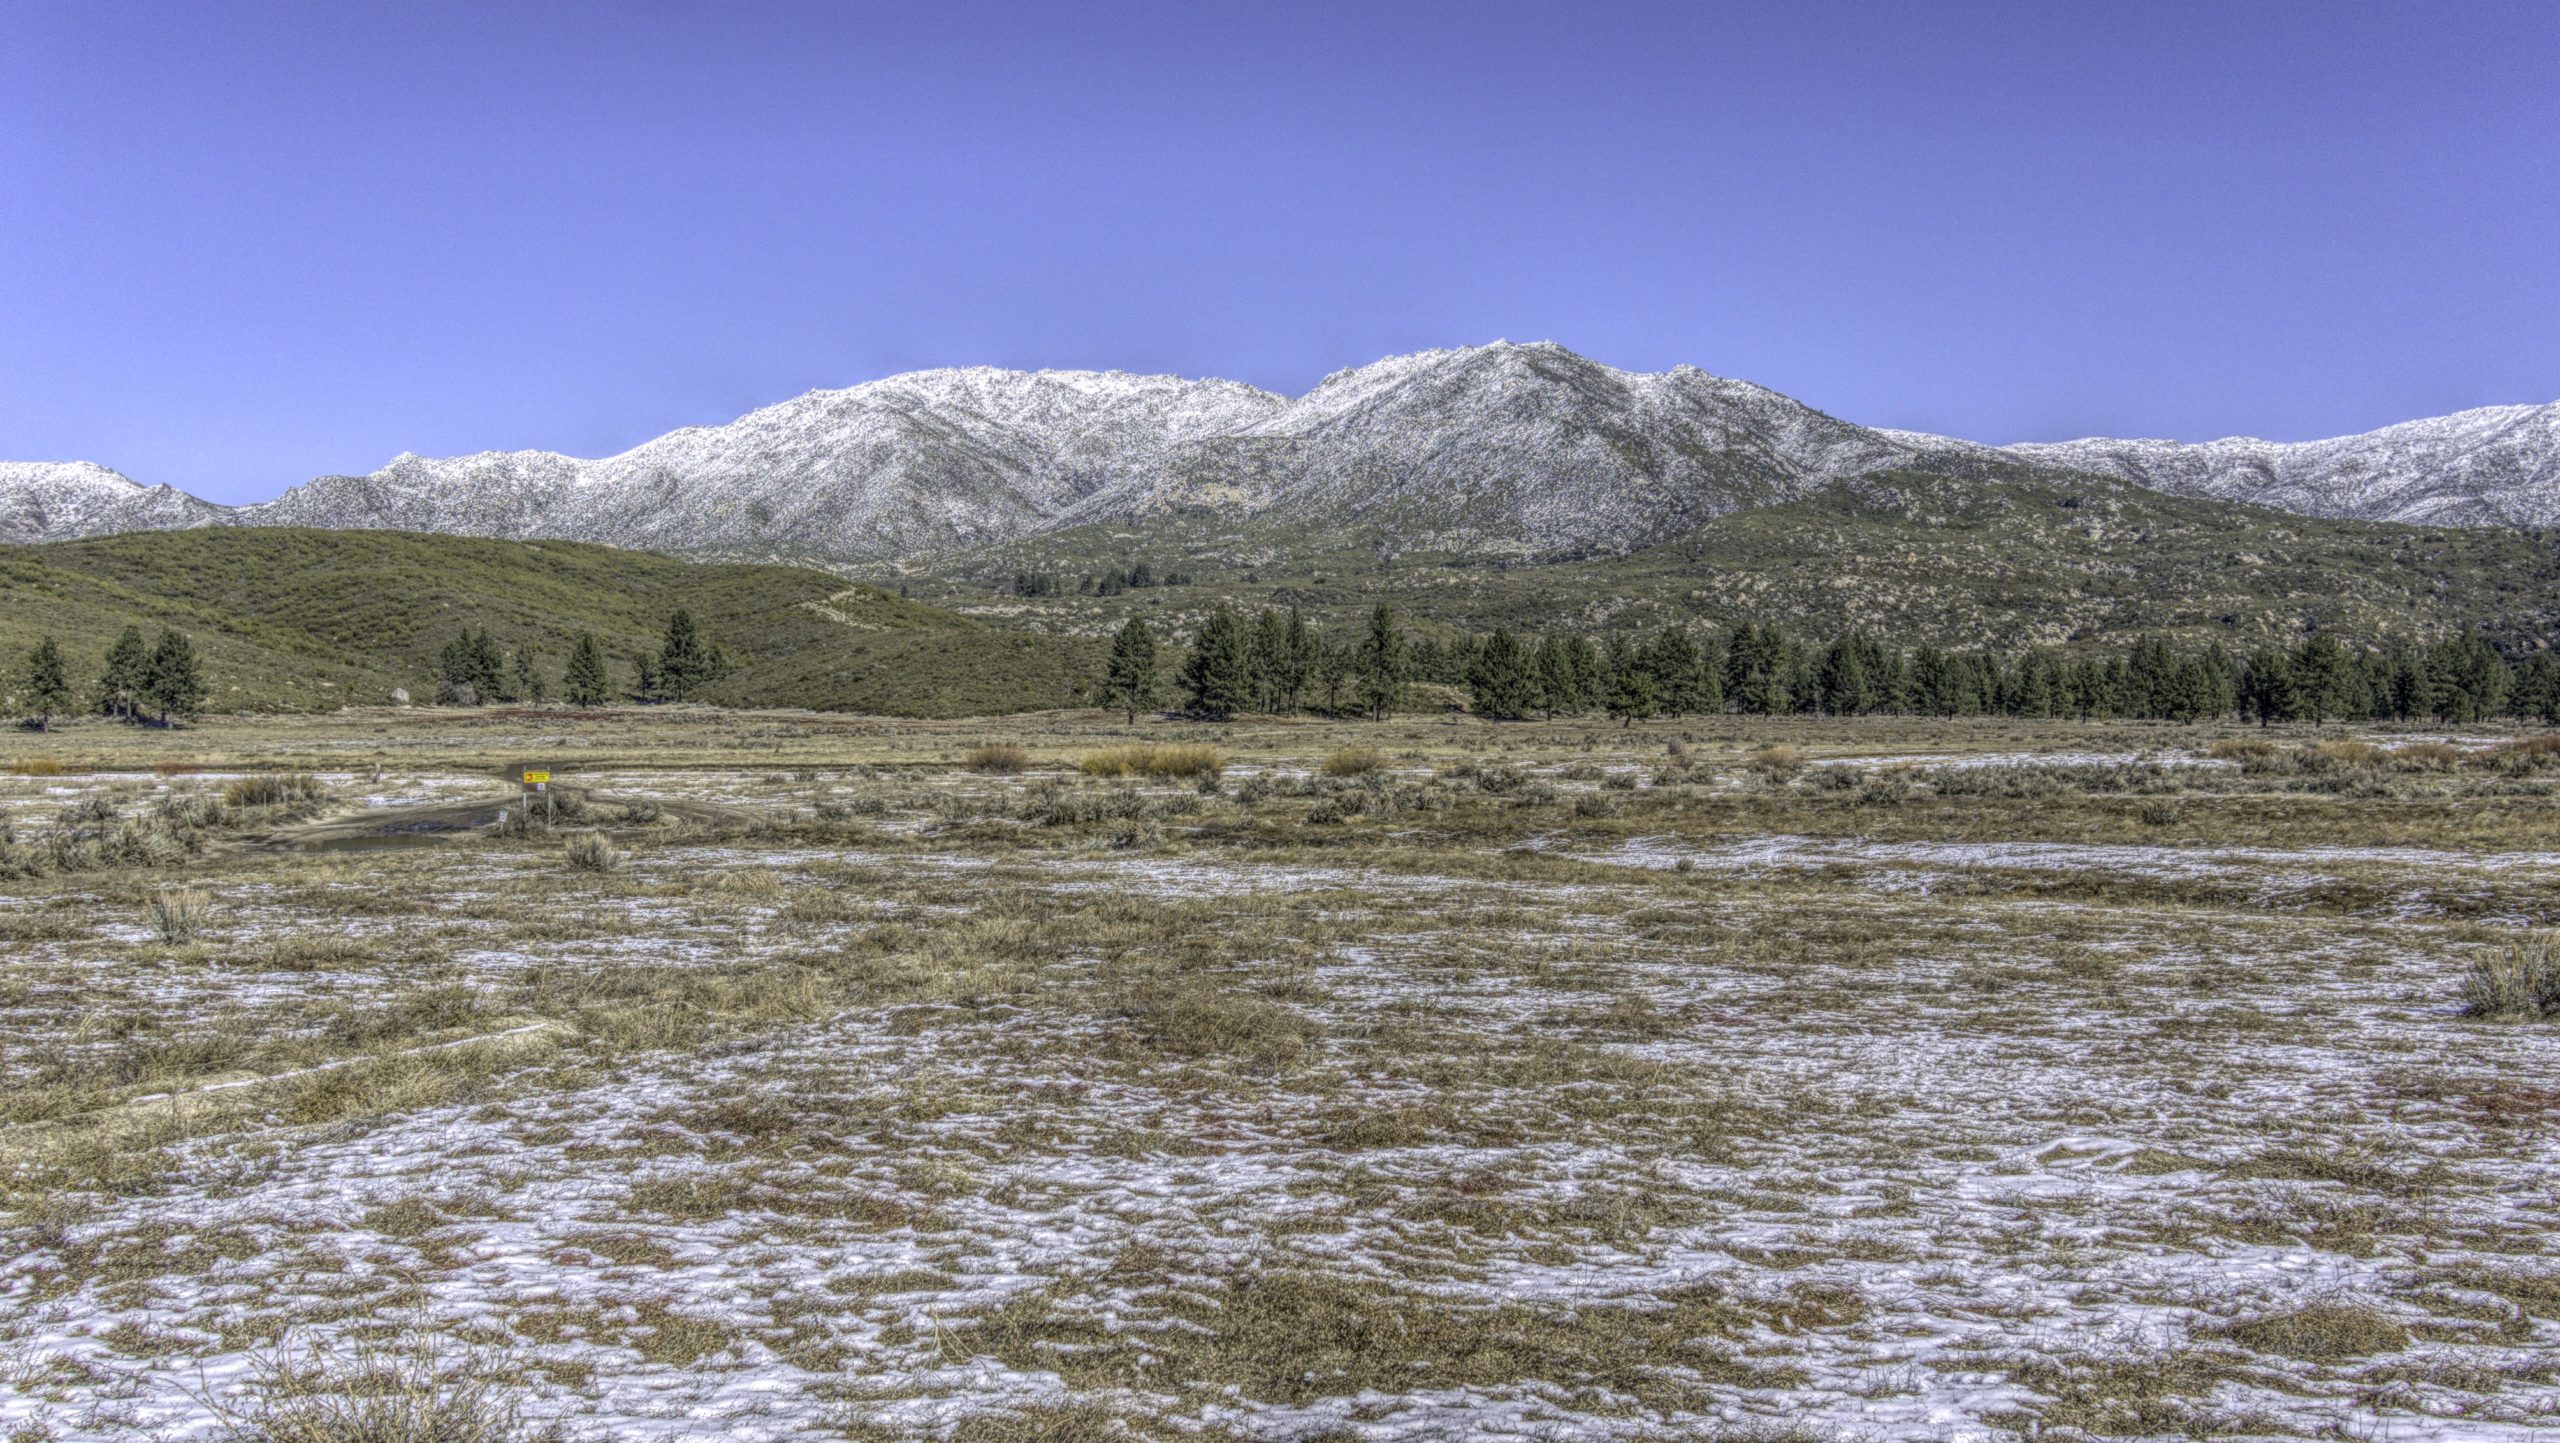 A view of the San Jacinto Mountains with a large field in front with some snow on it